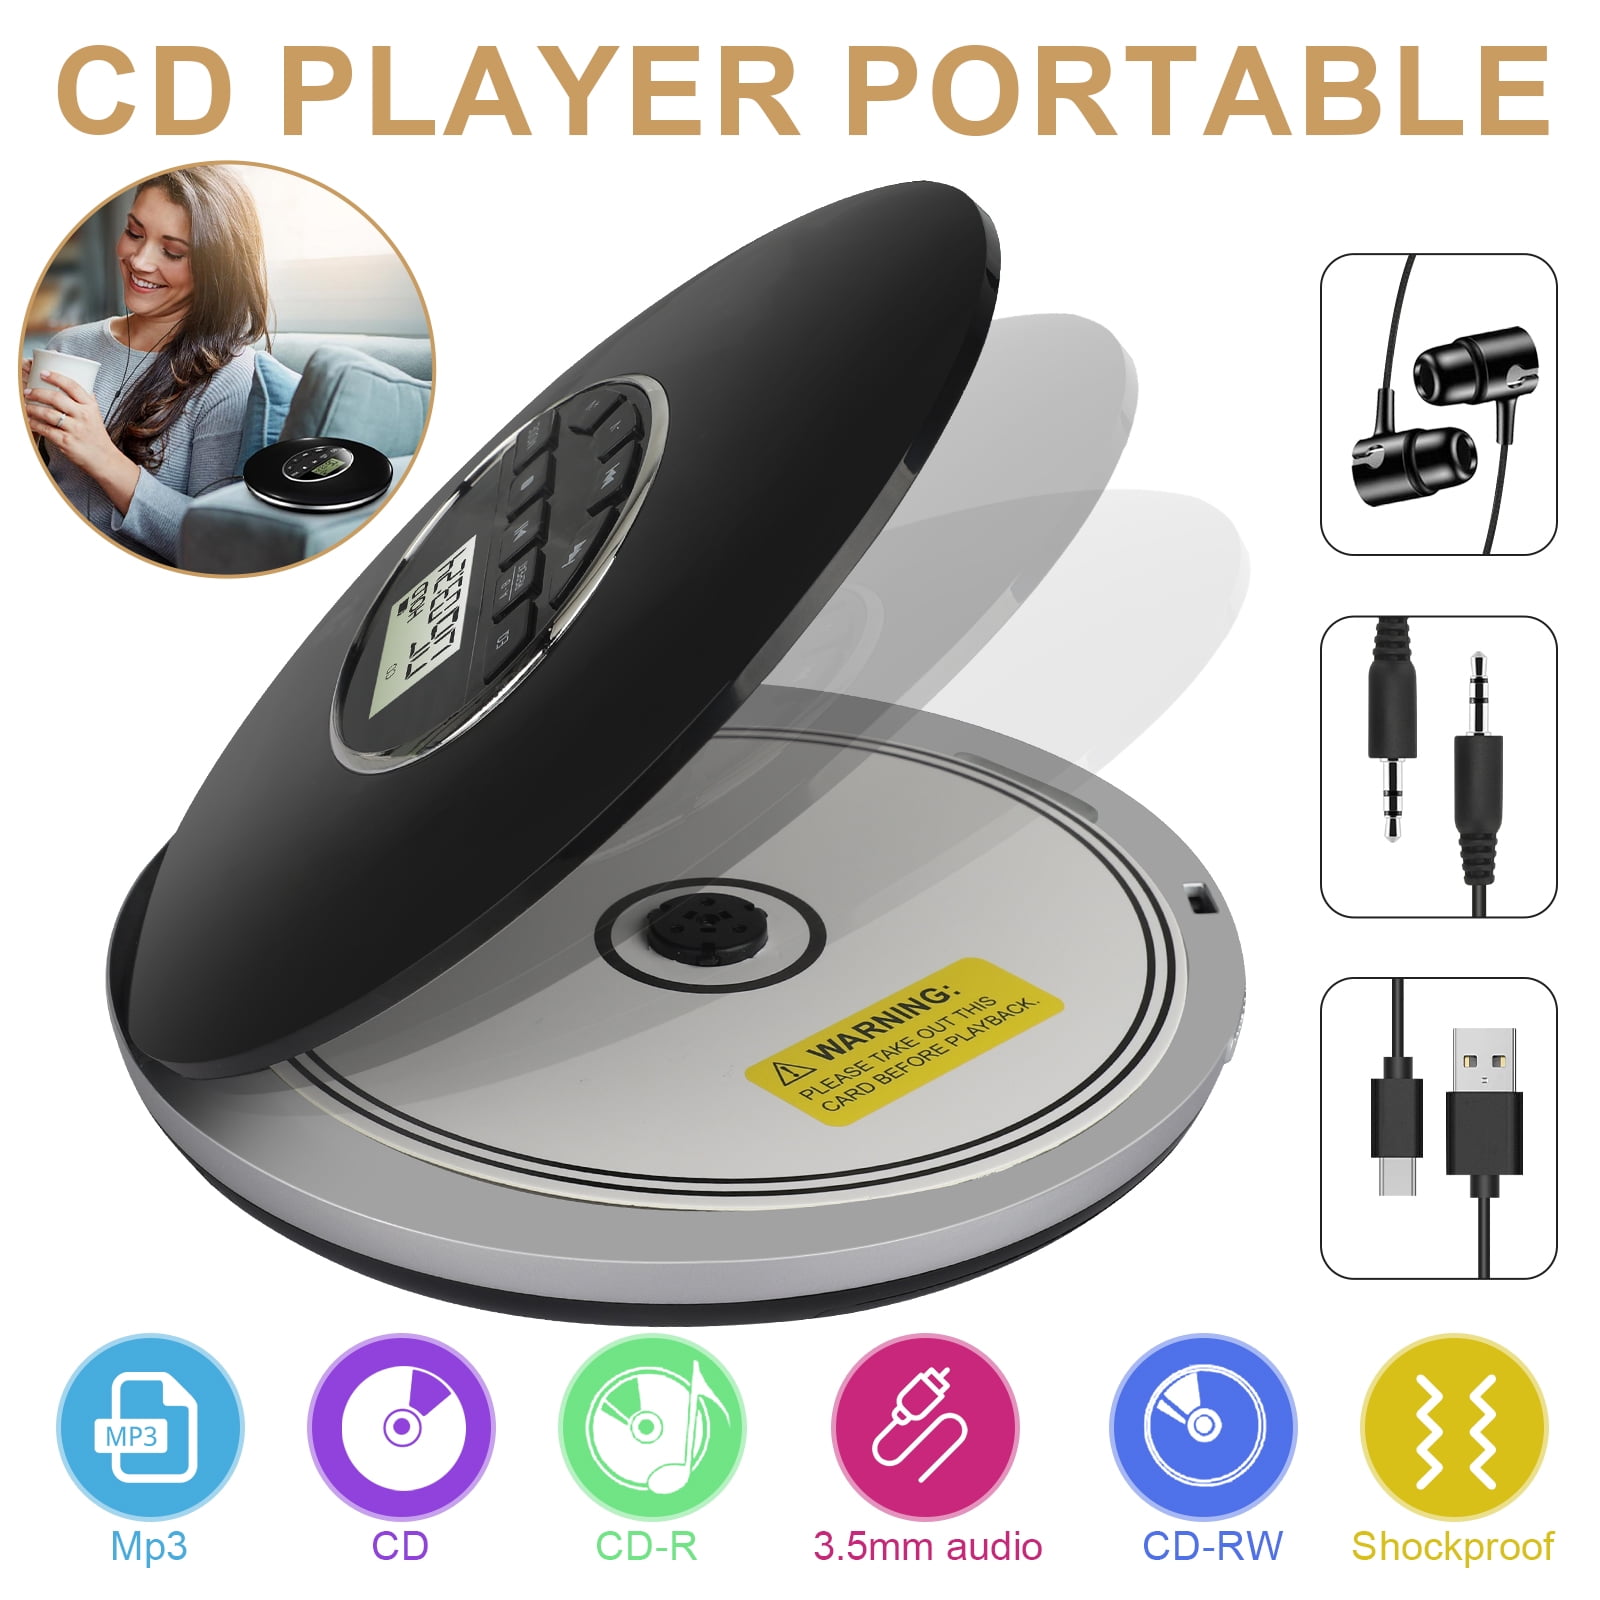 Small Compact Disc CD with In-Car 3.5mm Aux Cable compatibility Bluetooth Portable Personal CD Player 12 hr Battery & Shockproof & Music,Gift for Kids & Adults & Students